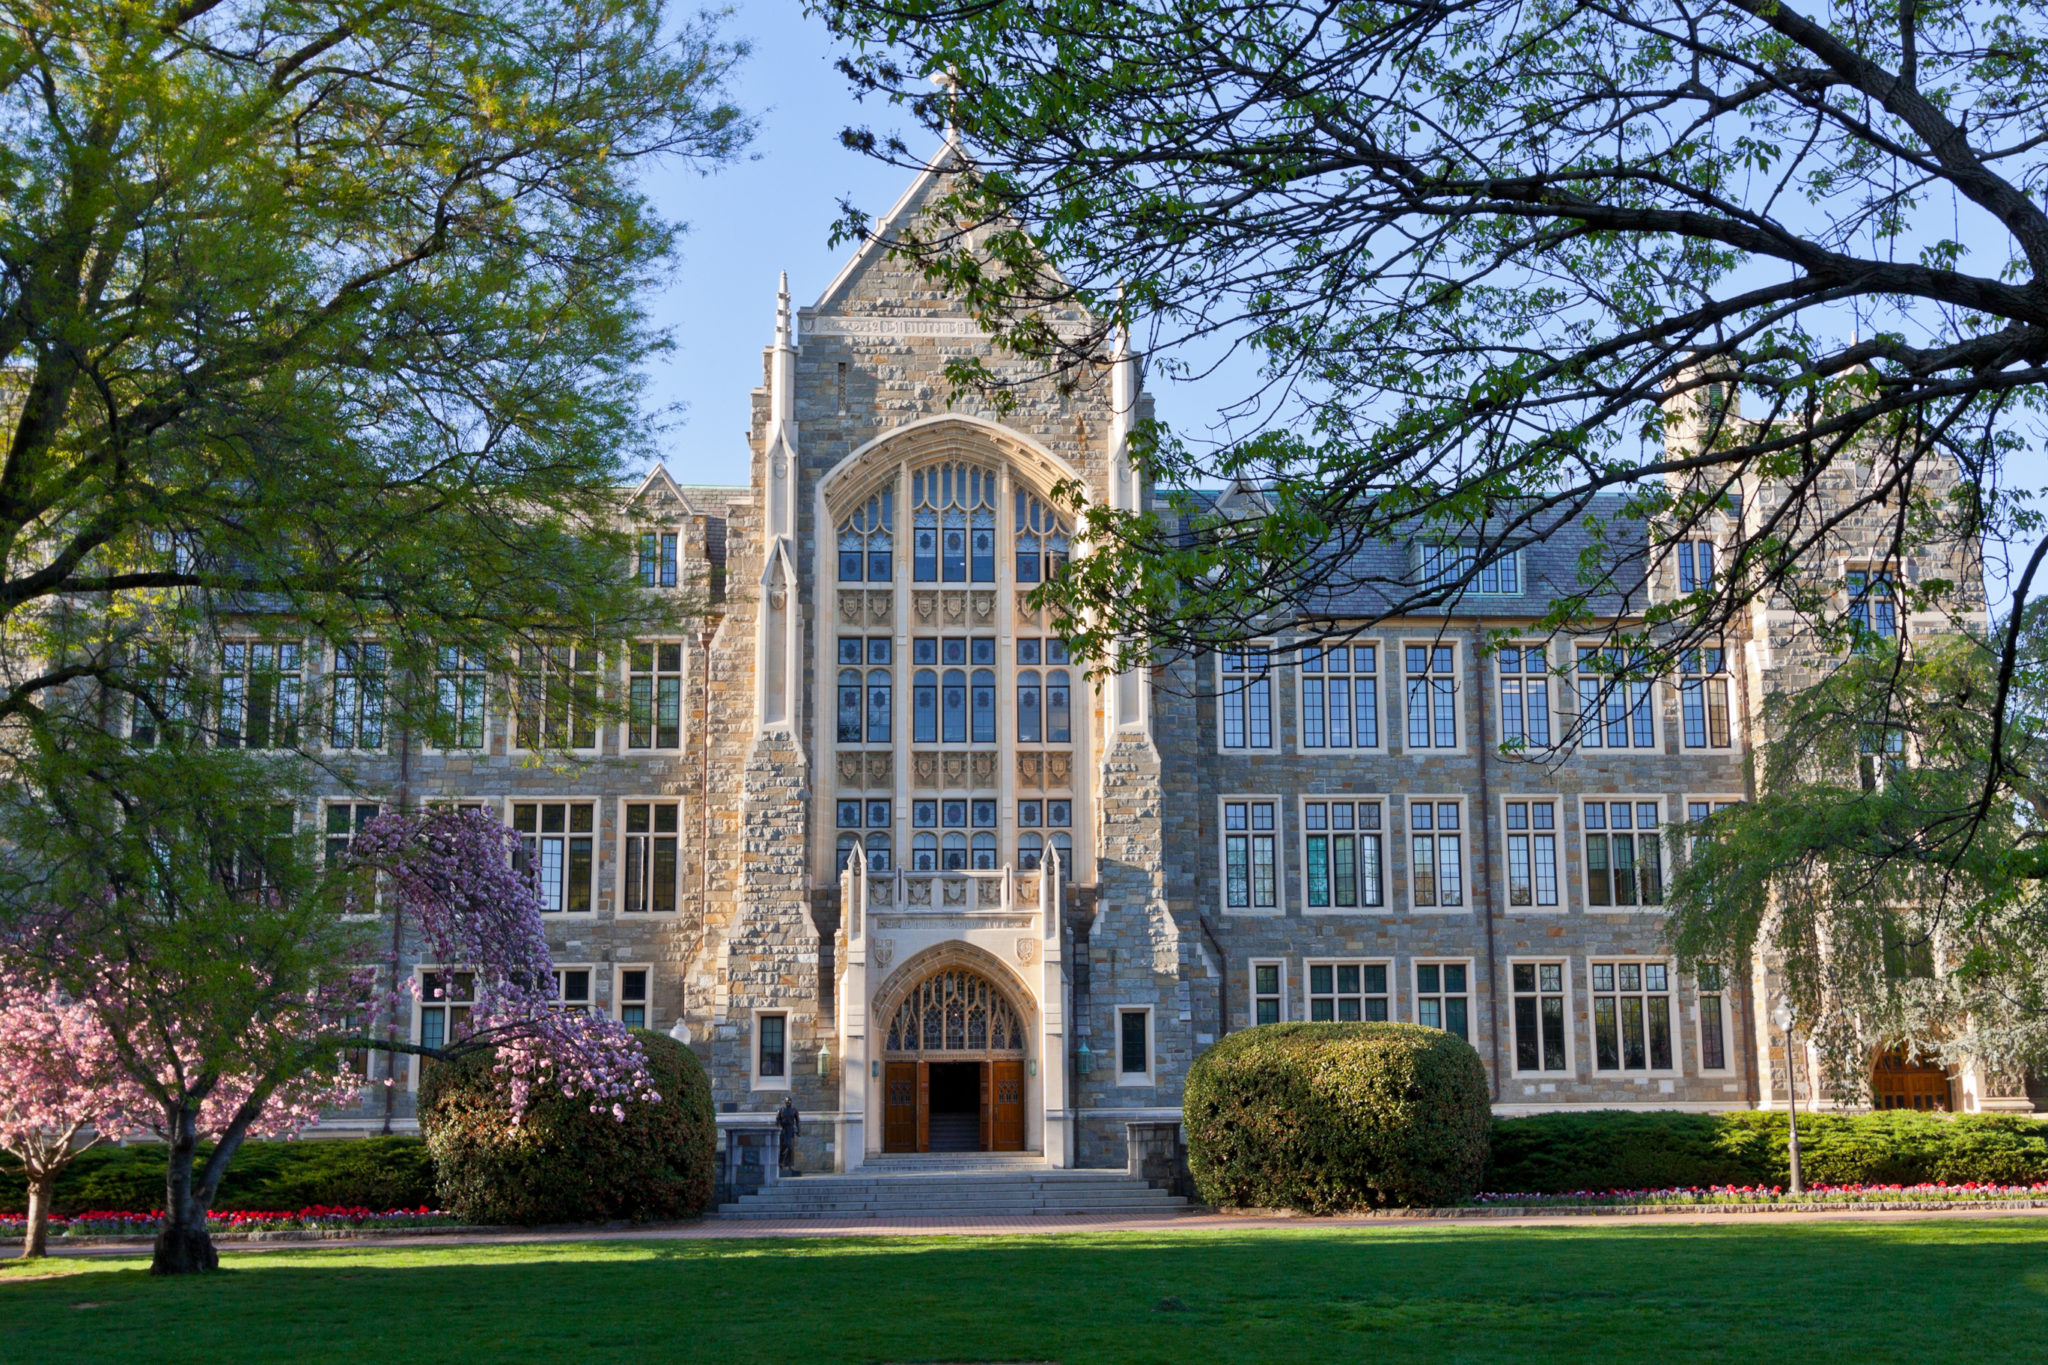 Front view of the Georgetown University in Washington